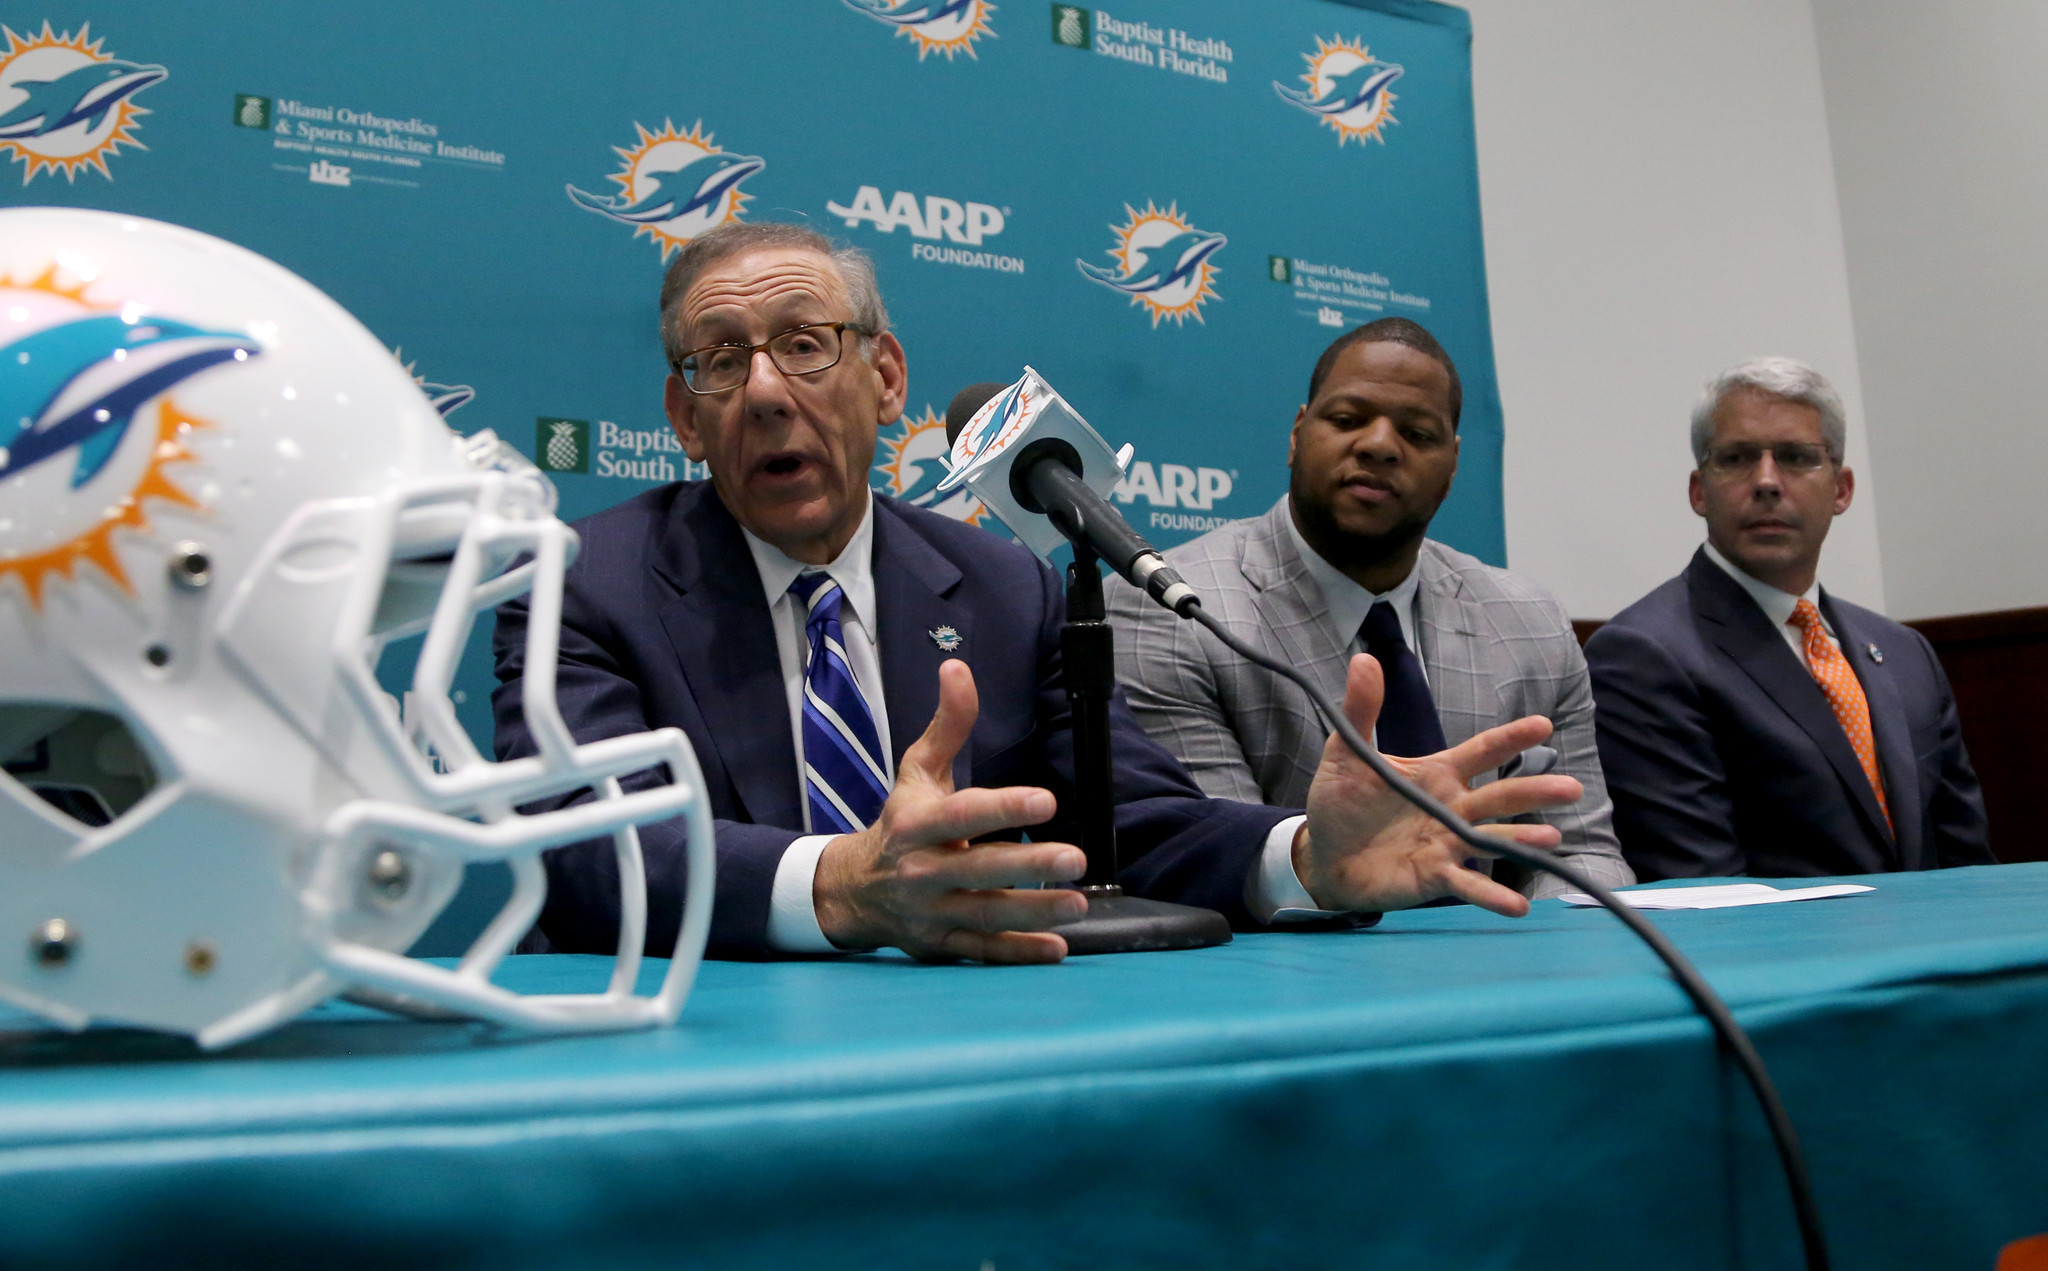 Dolphins old model was to be big spenders, the new model isn't about expensive acquisitions.